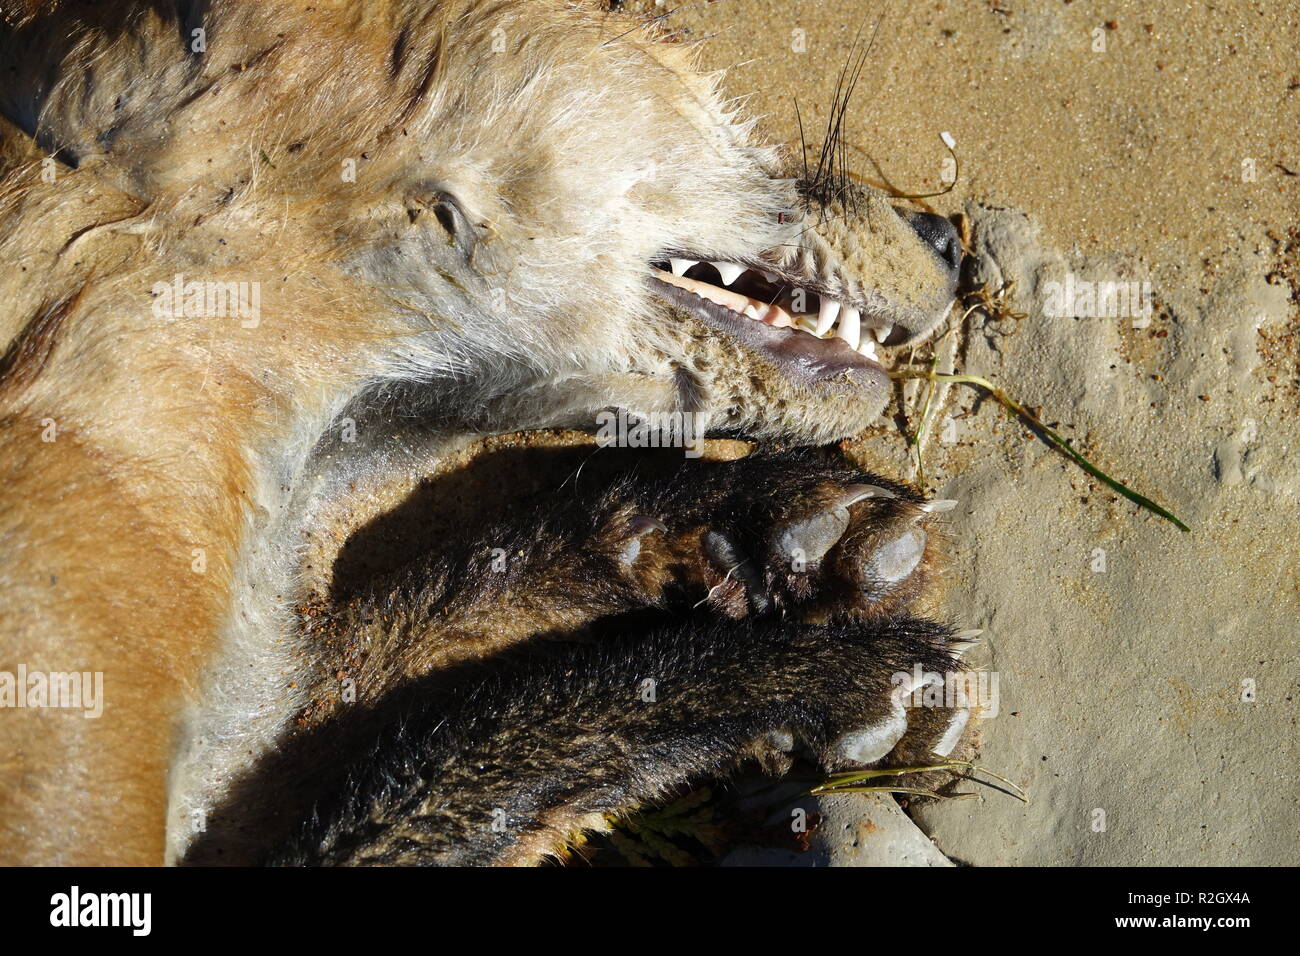 detail of snout, teeth and paws of dead red fox on beach Stock Photo